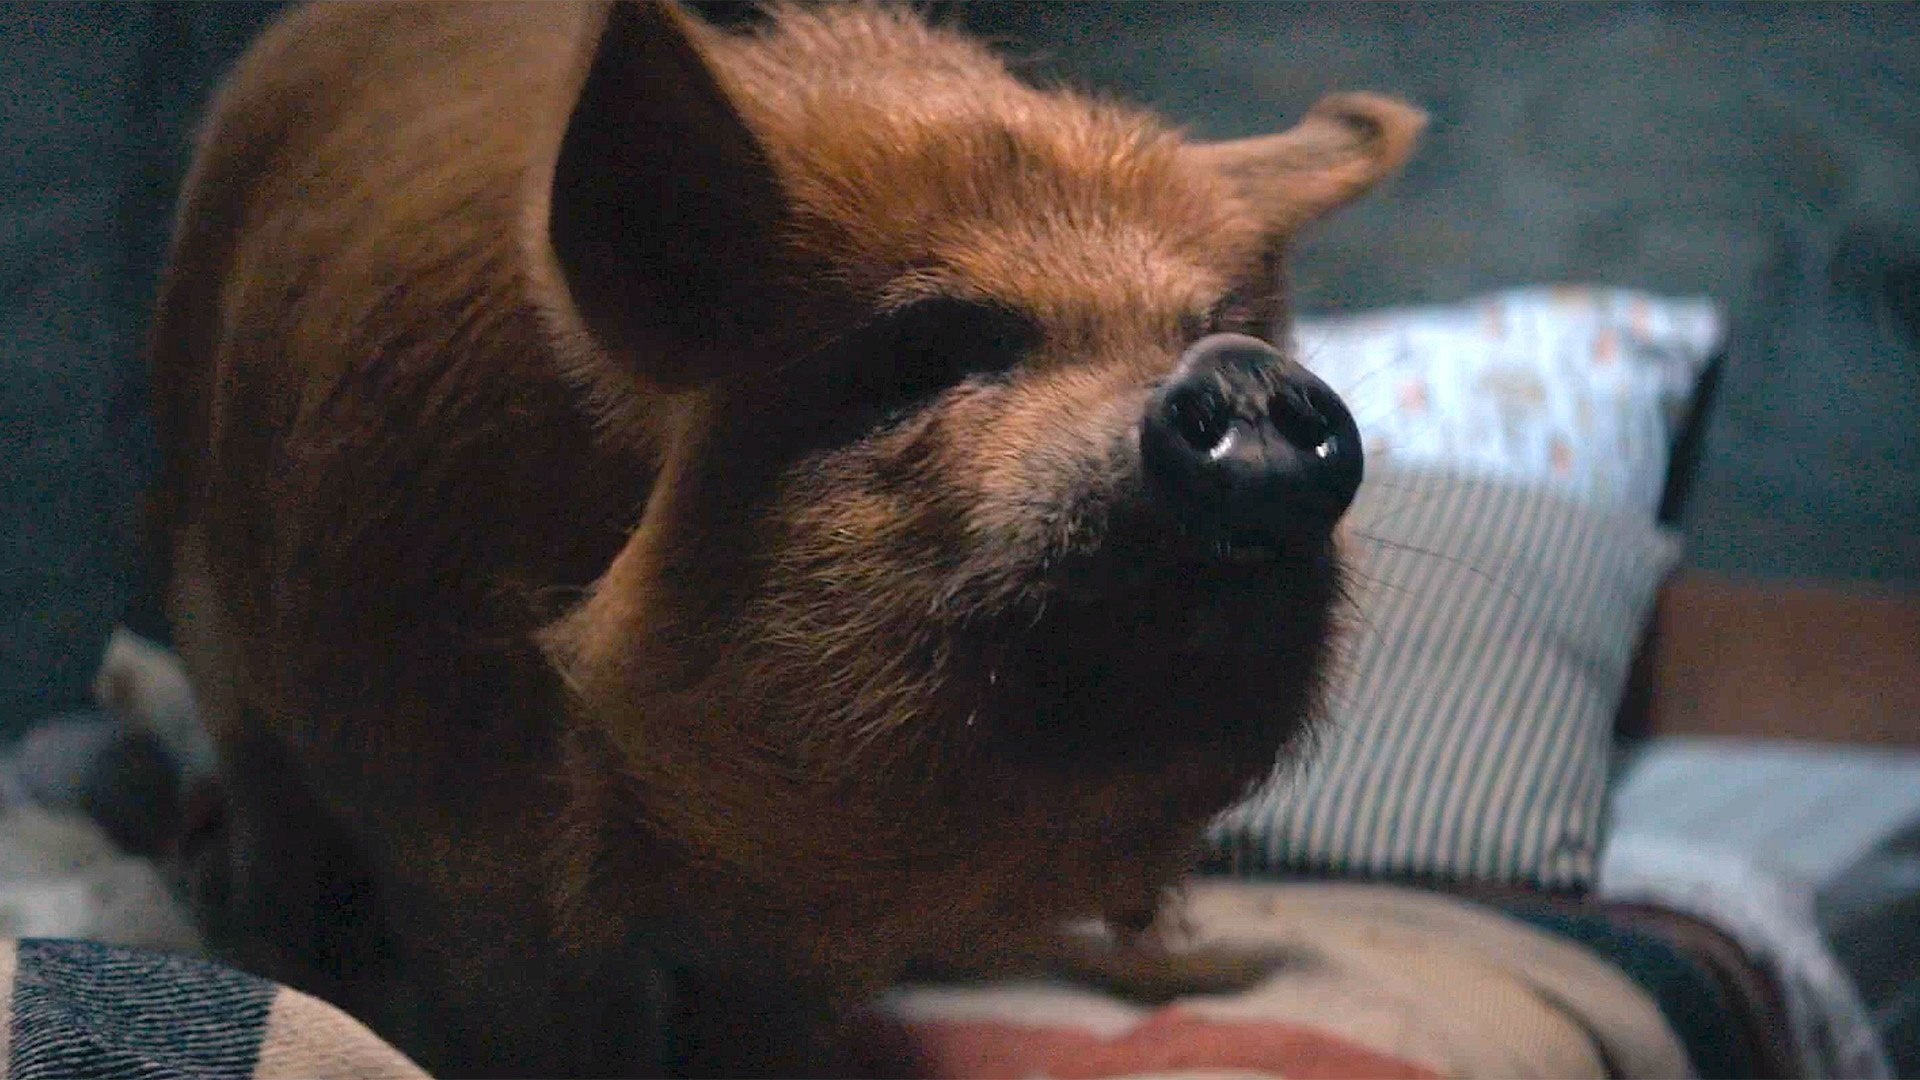 Pig, Critically acclaimed film, Remarkable performance, Unexpected twists, 1920x1080 Full HD Desktop